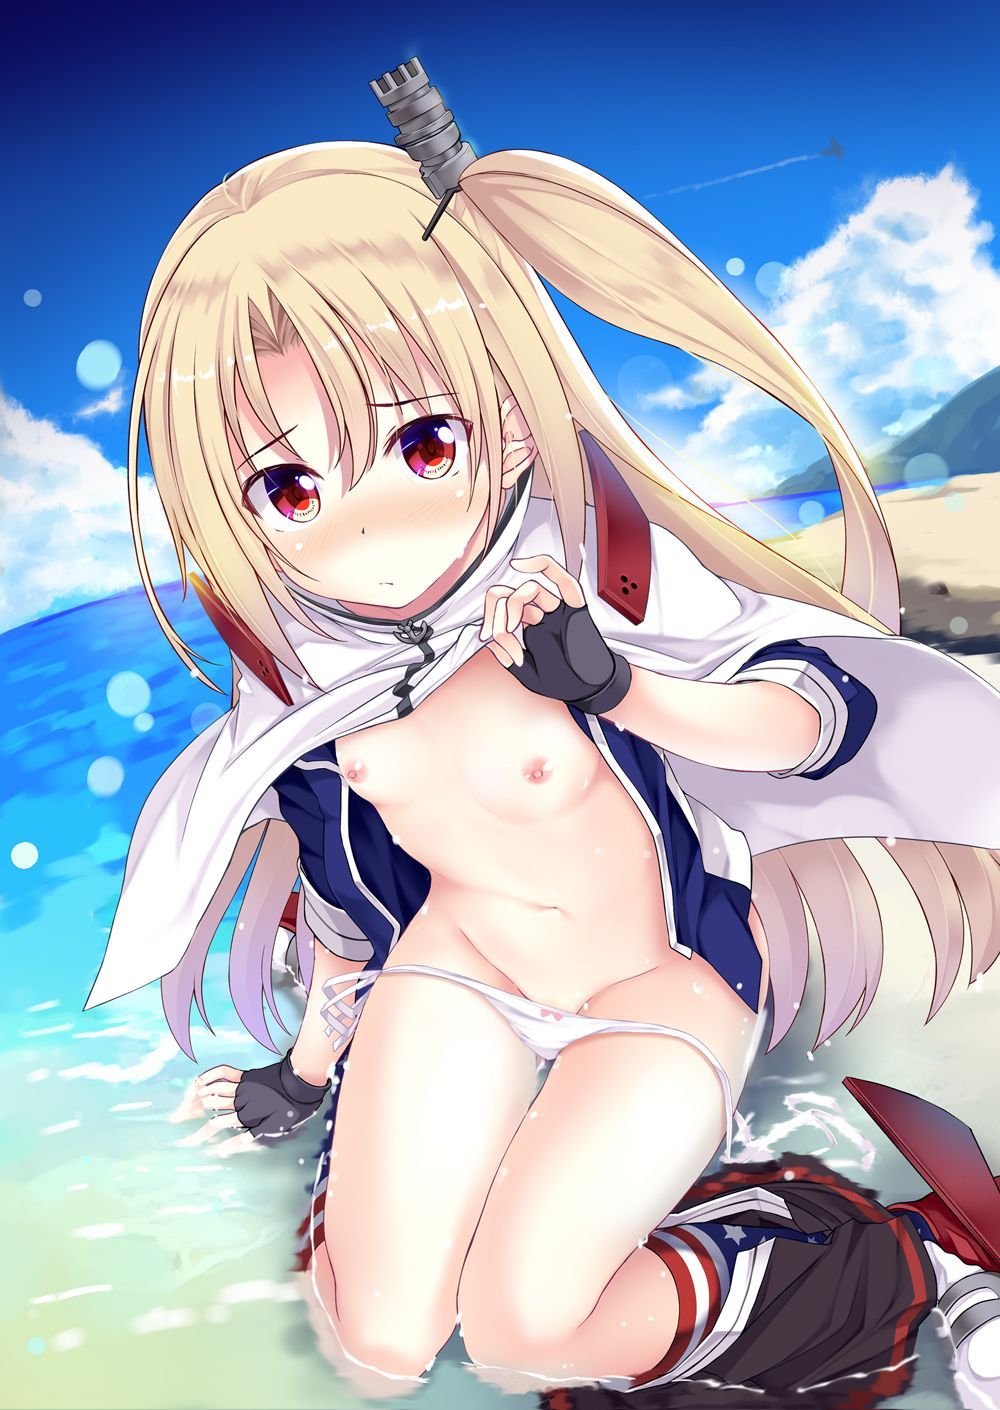 【Azur Lane】I will put cleveland's ero cute images together for free ☆ 22